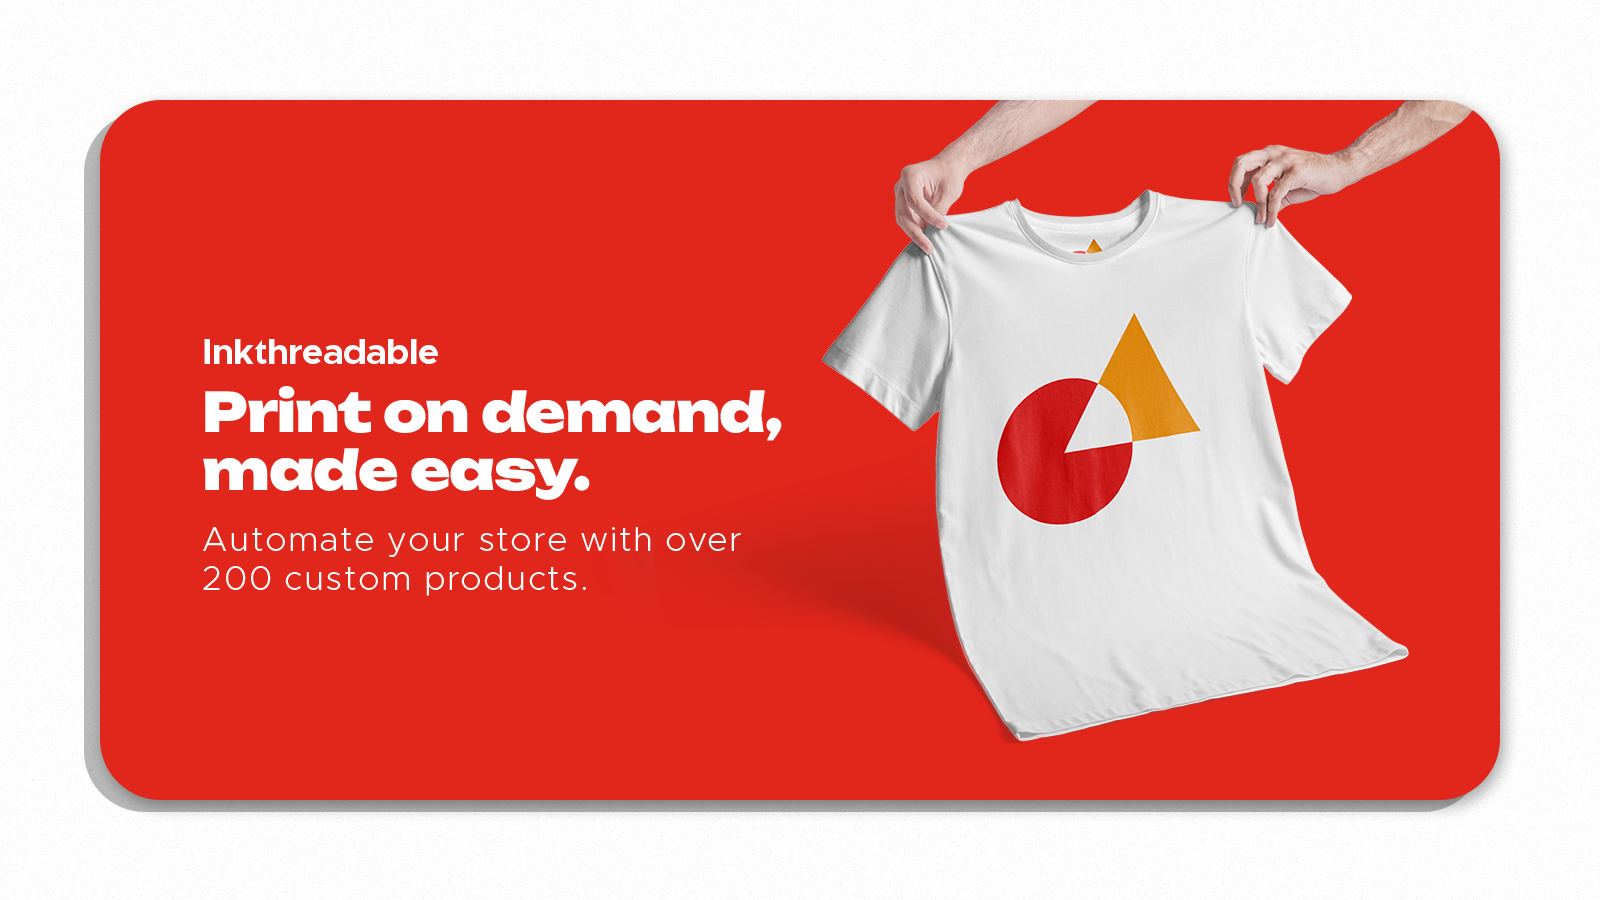 Print on demand made easy. Automate your store.